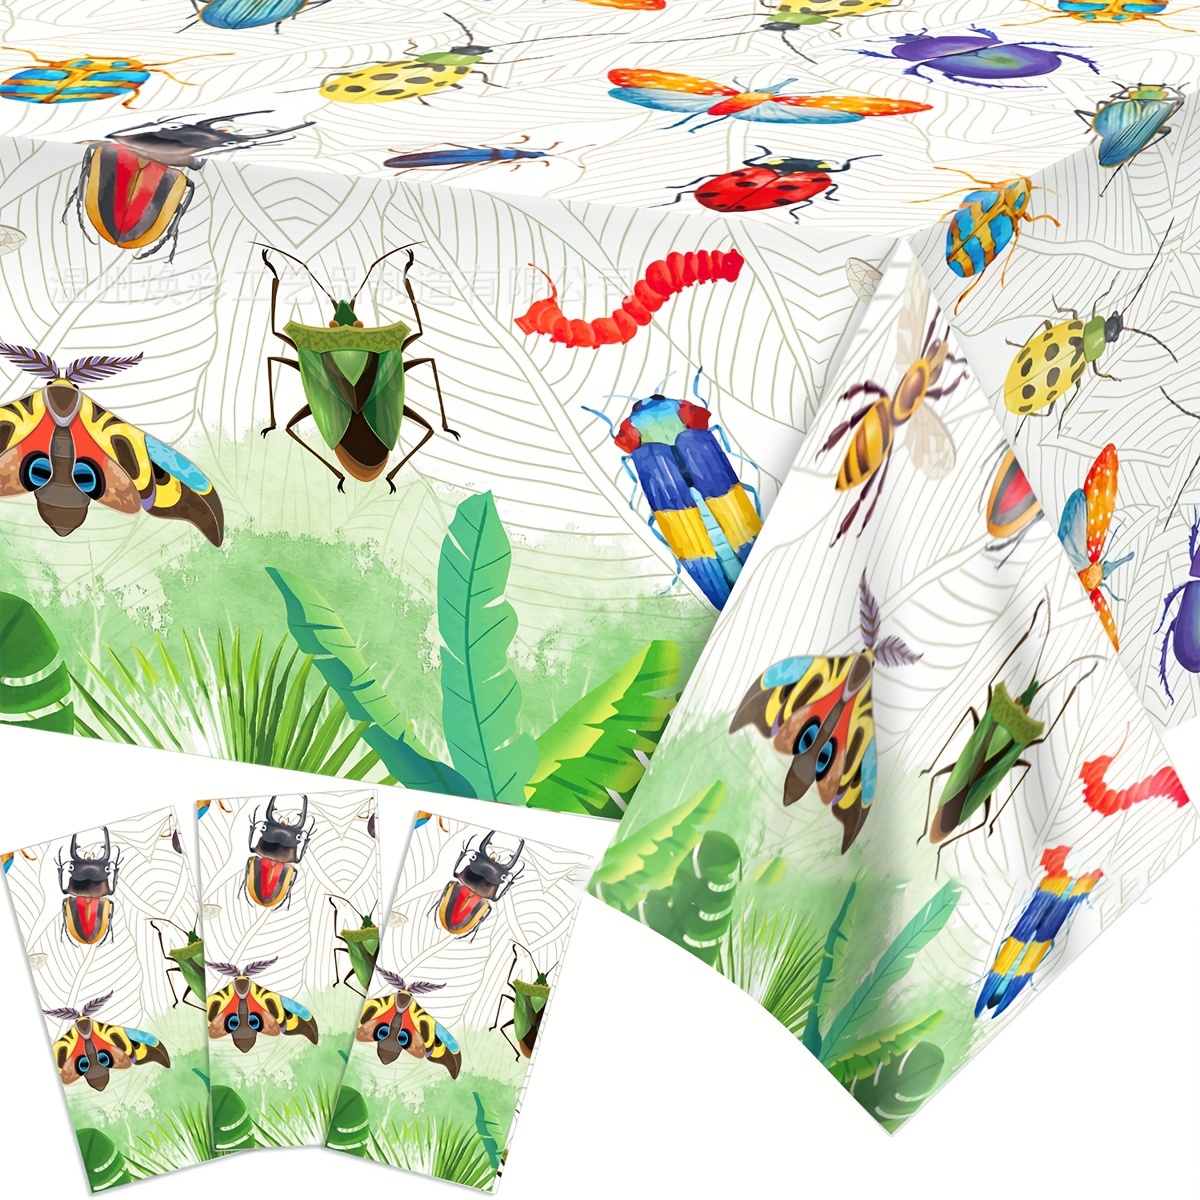 

1pc, Tablecloth For Insect Theme Party Decorations With Ladybugs And Dragonflies For Festive Party Gathering Spring Party Scene Decor Home Room Decor